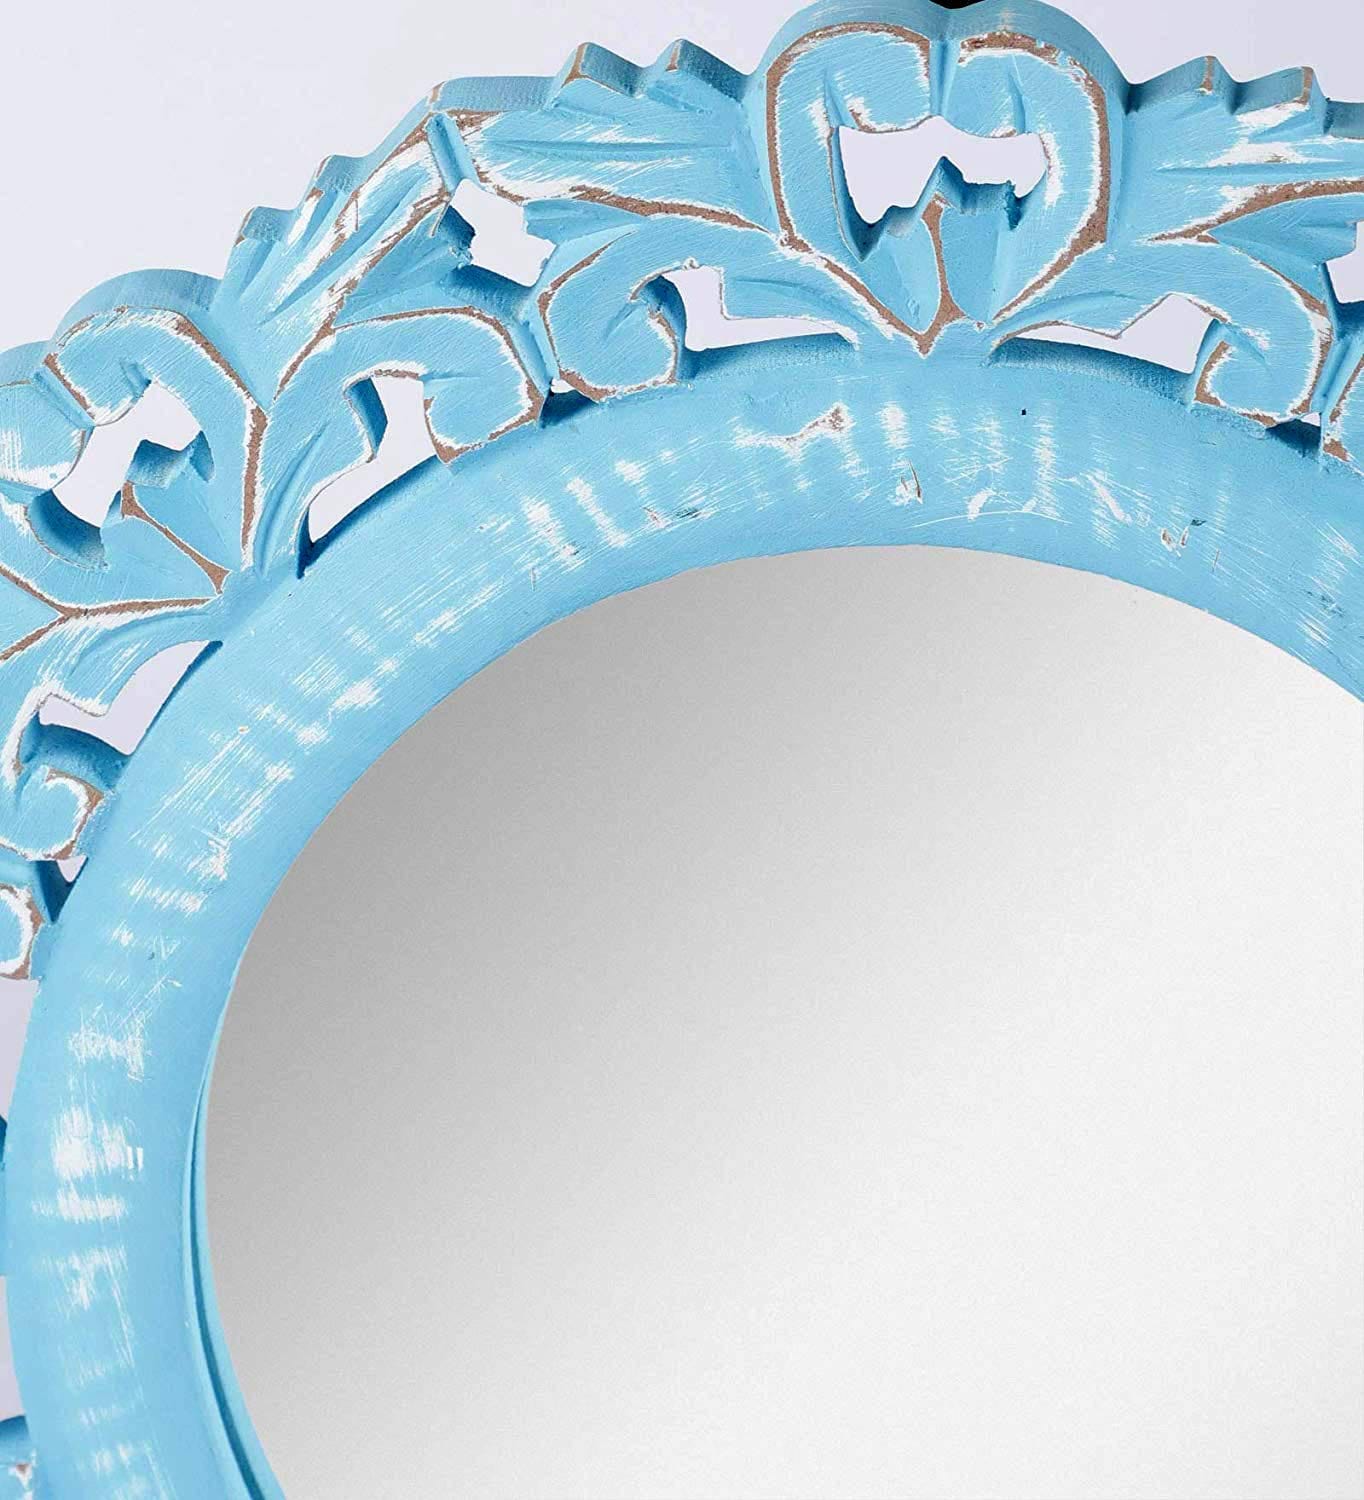 Wood Hand Crafted Round Shape Vanity Wall Mount Mirror Glass-Blue, 35X 35 X 1.5 cm, Framed